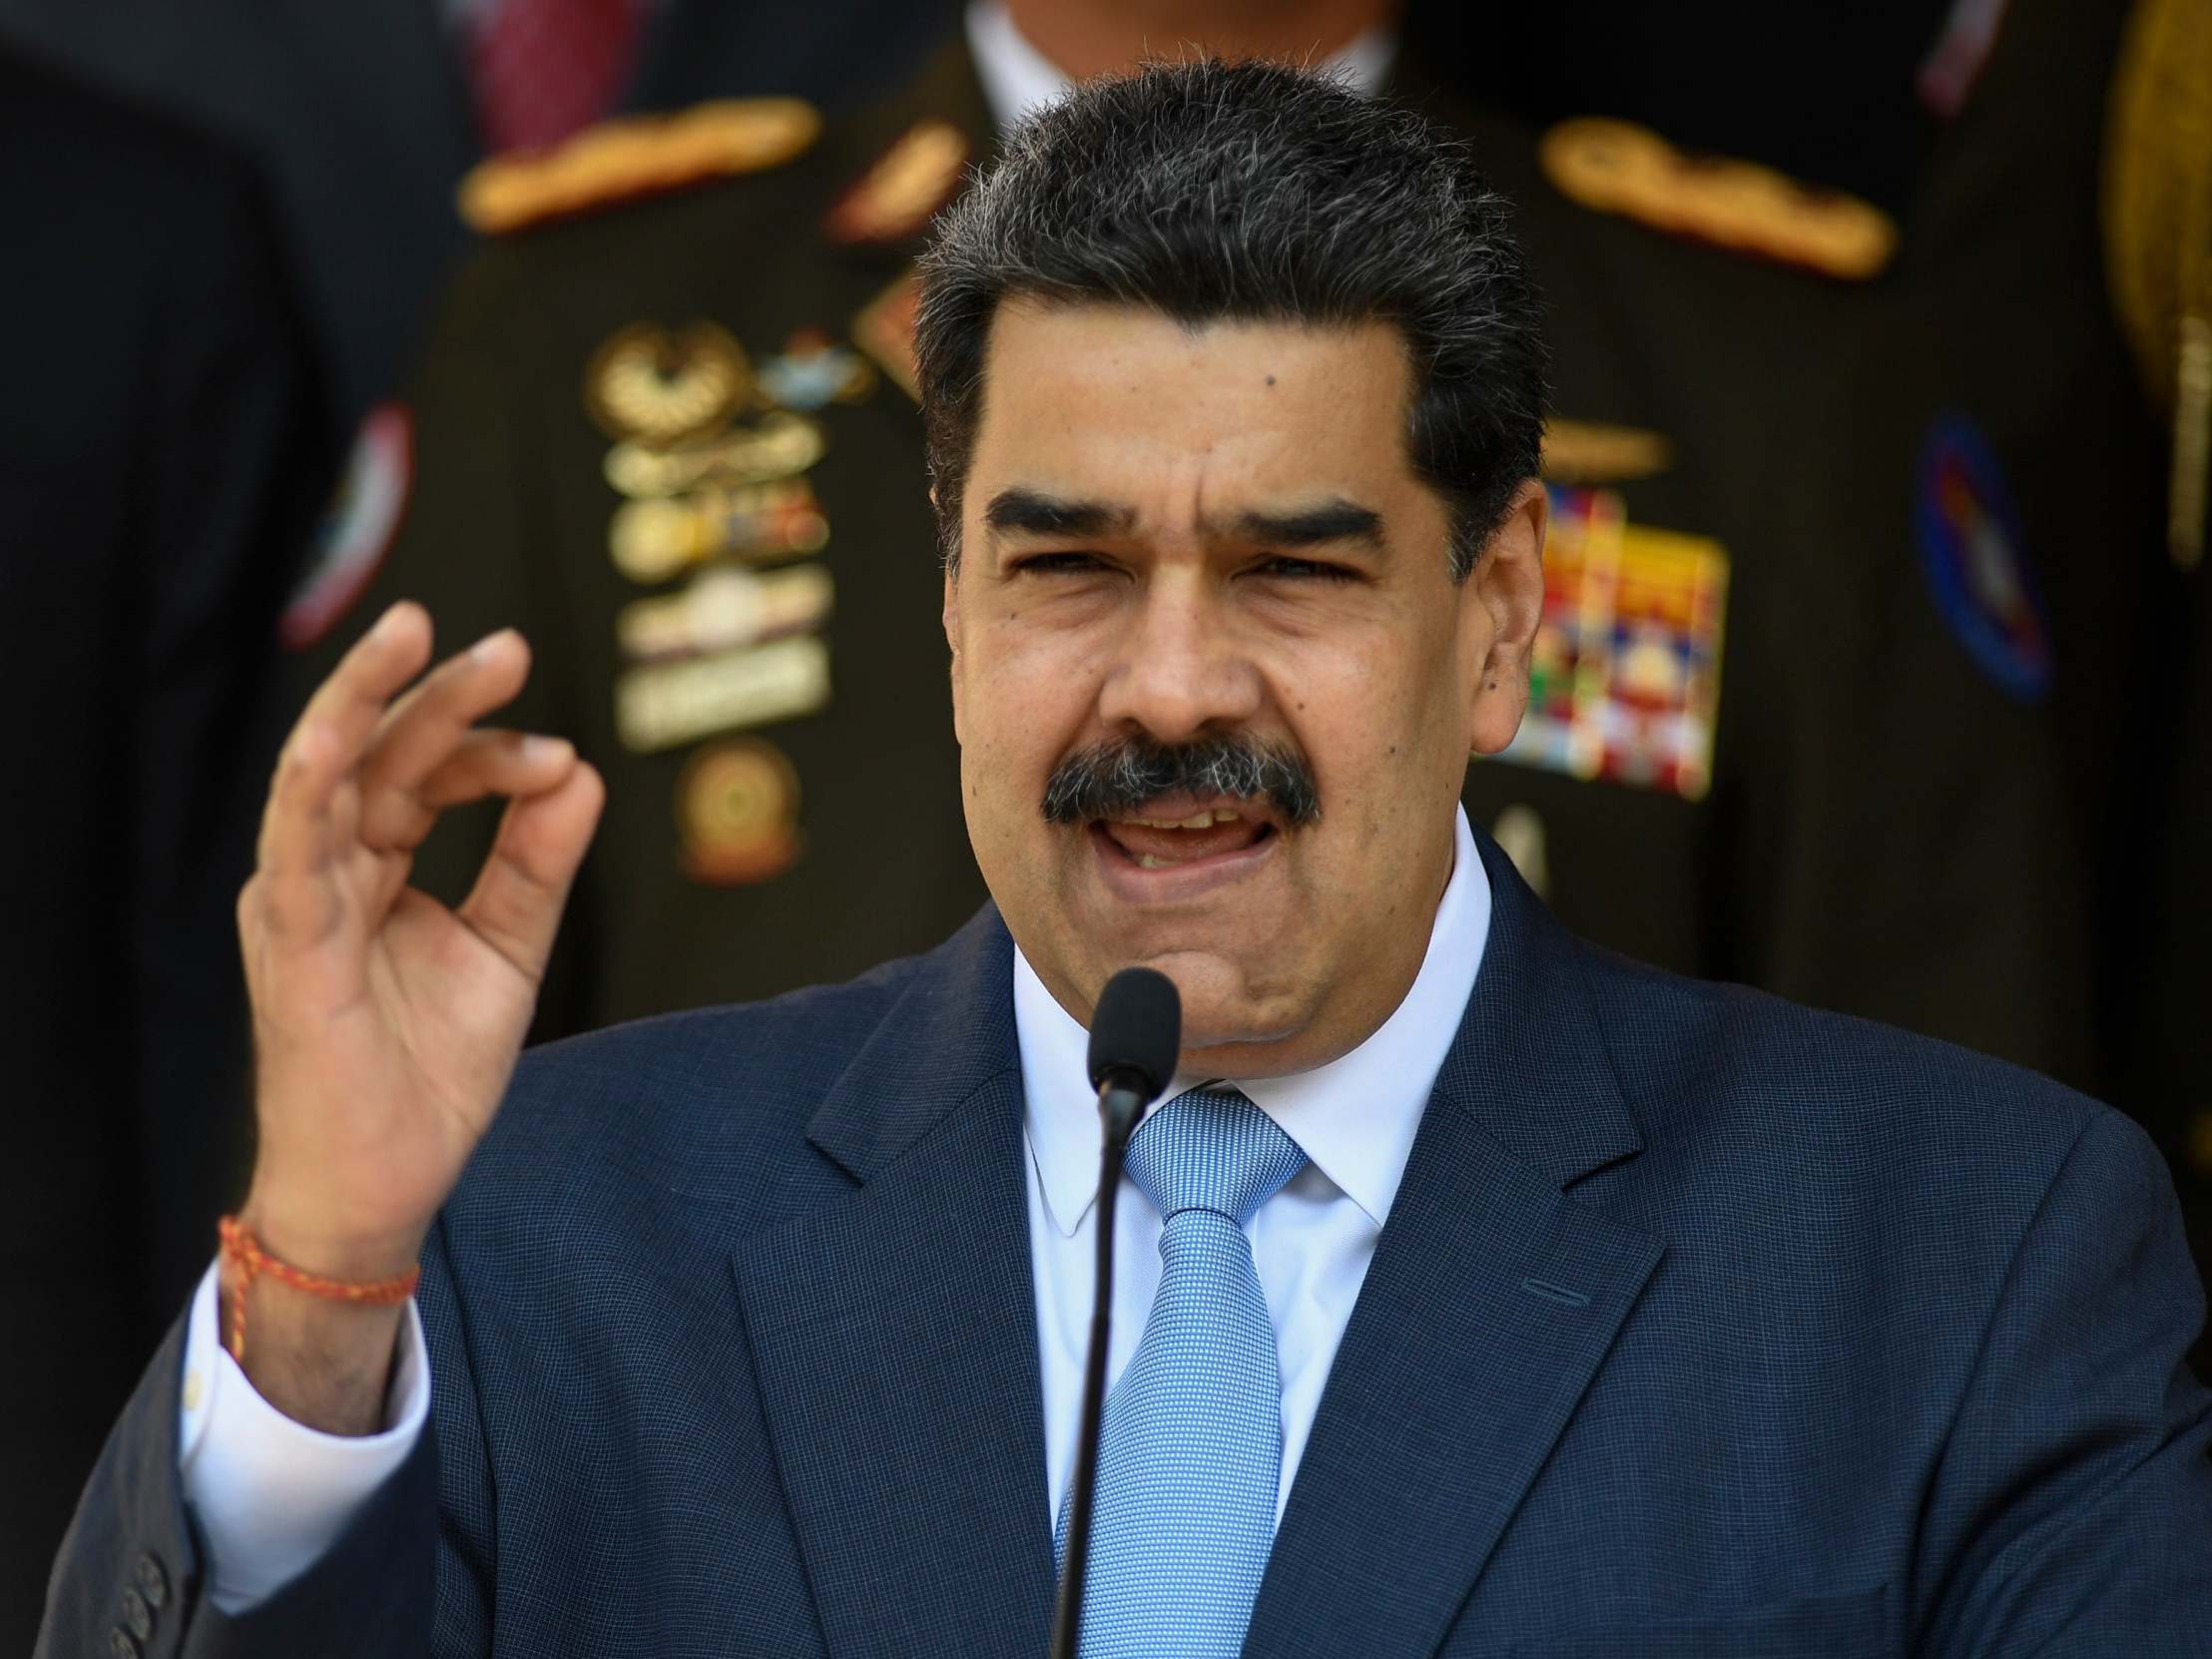 Mr Maduro accused Mr Trump of 'OKing' an attempt on his life